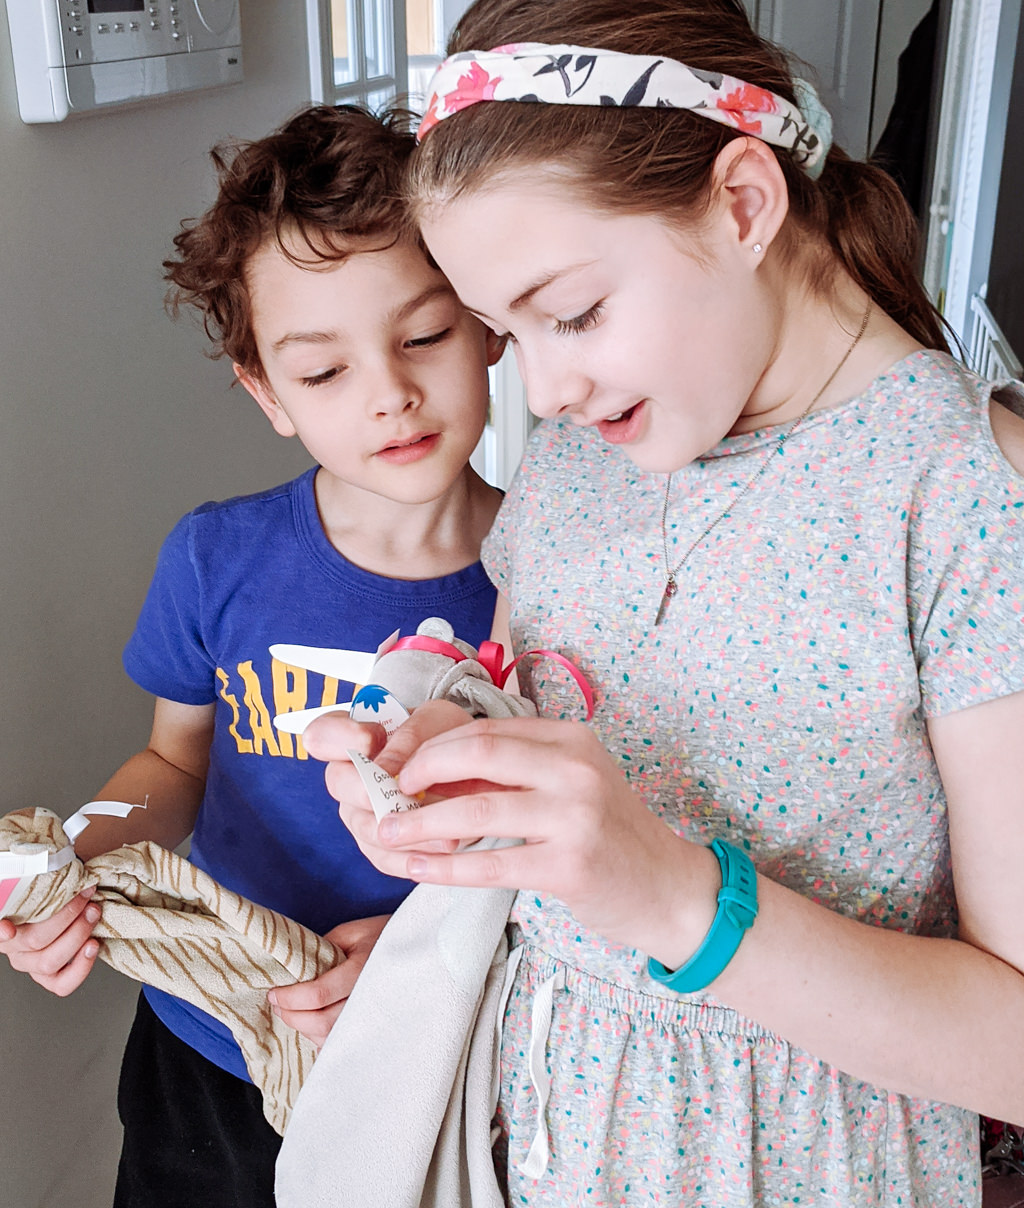 Kids on an indoor Easter scavenger hunt. Copyright Merriment Design Co. Do not use without written permision.